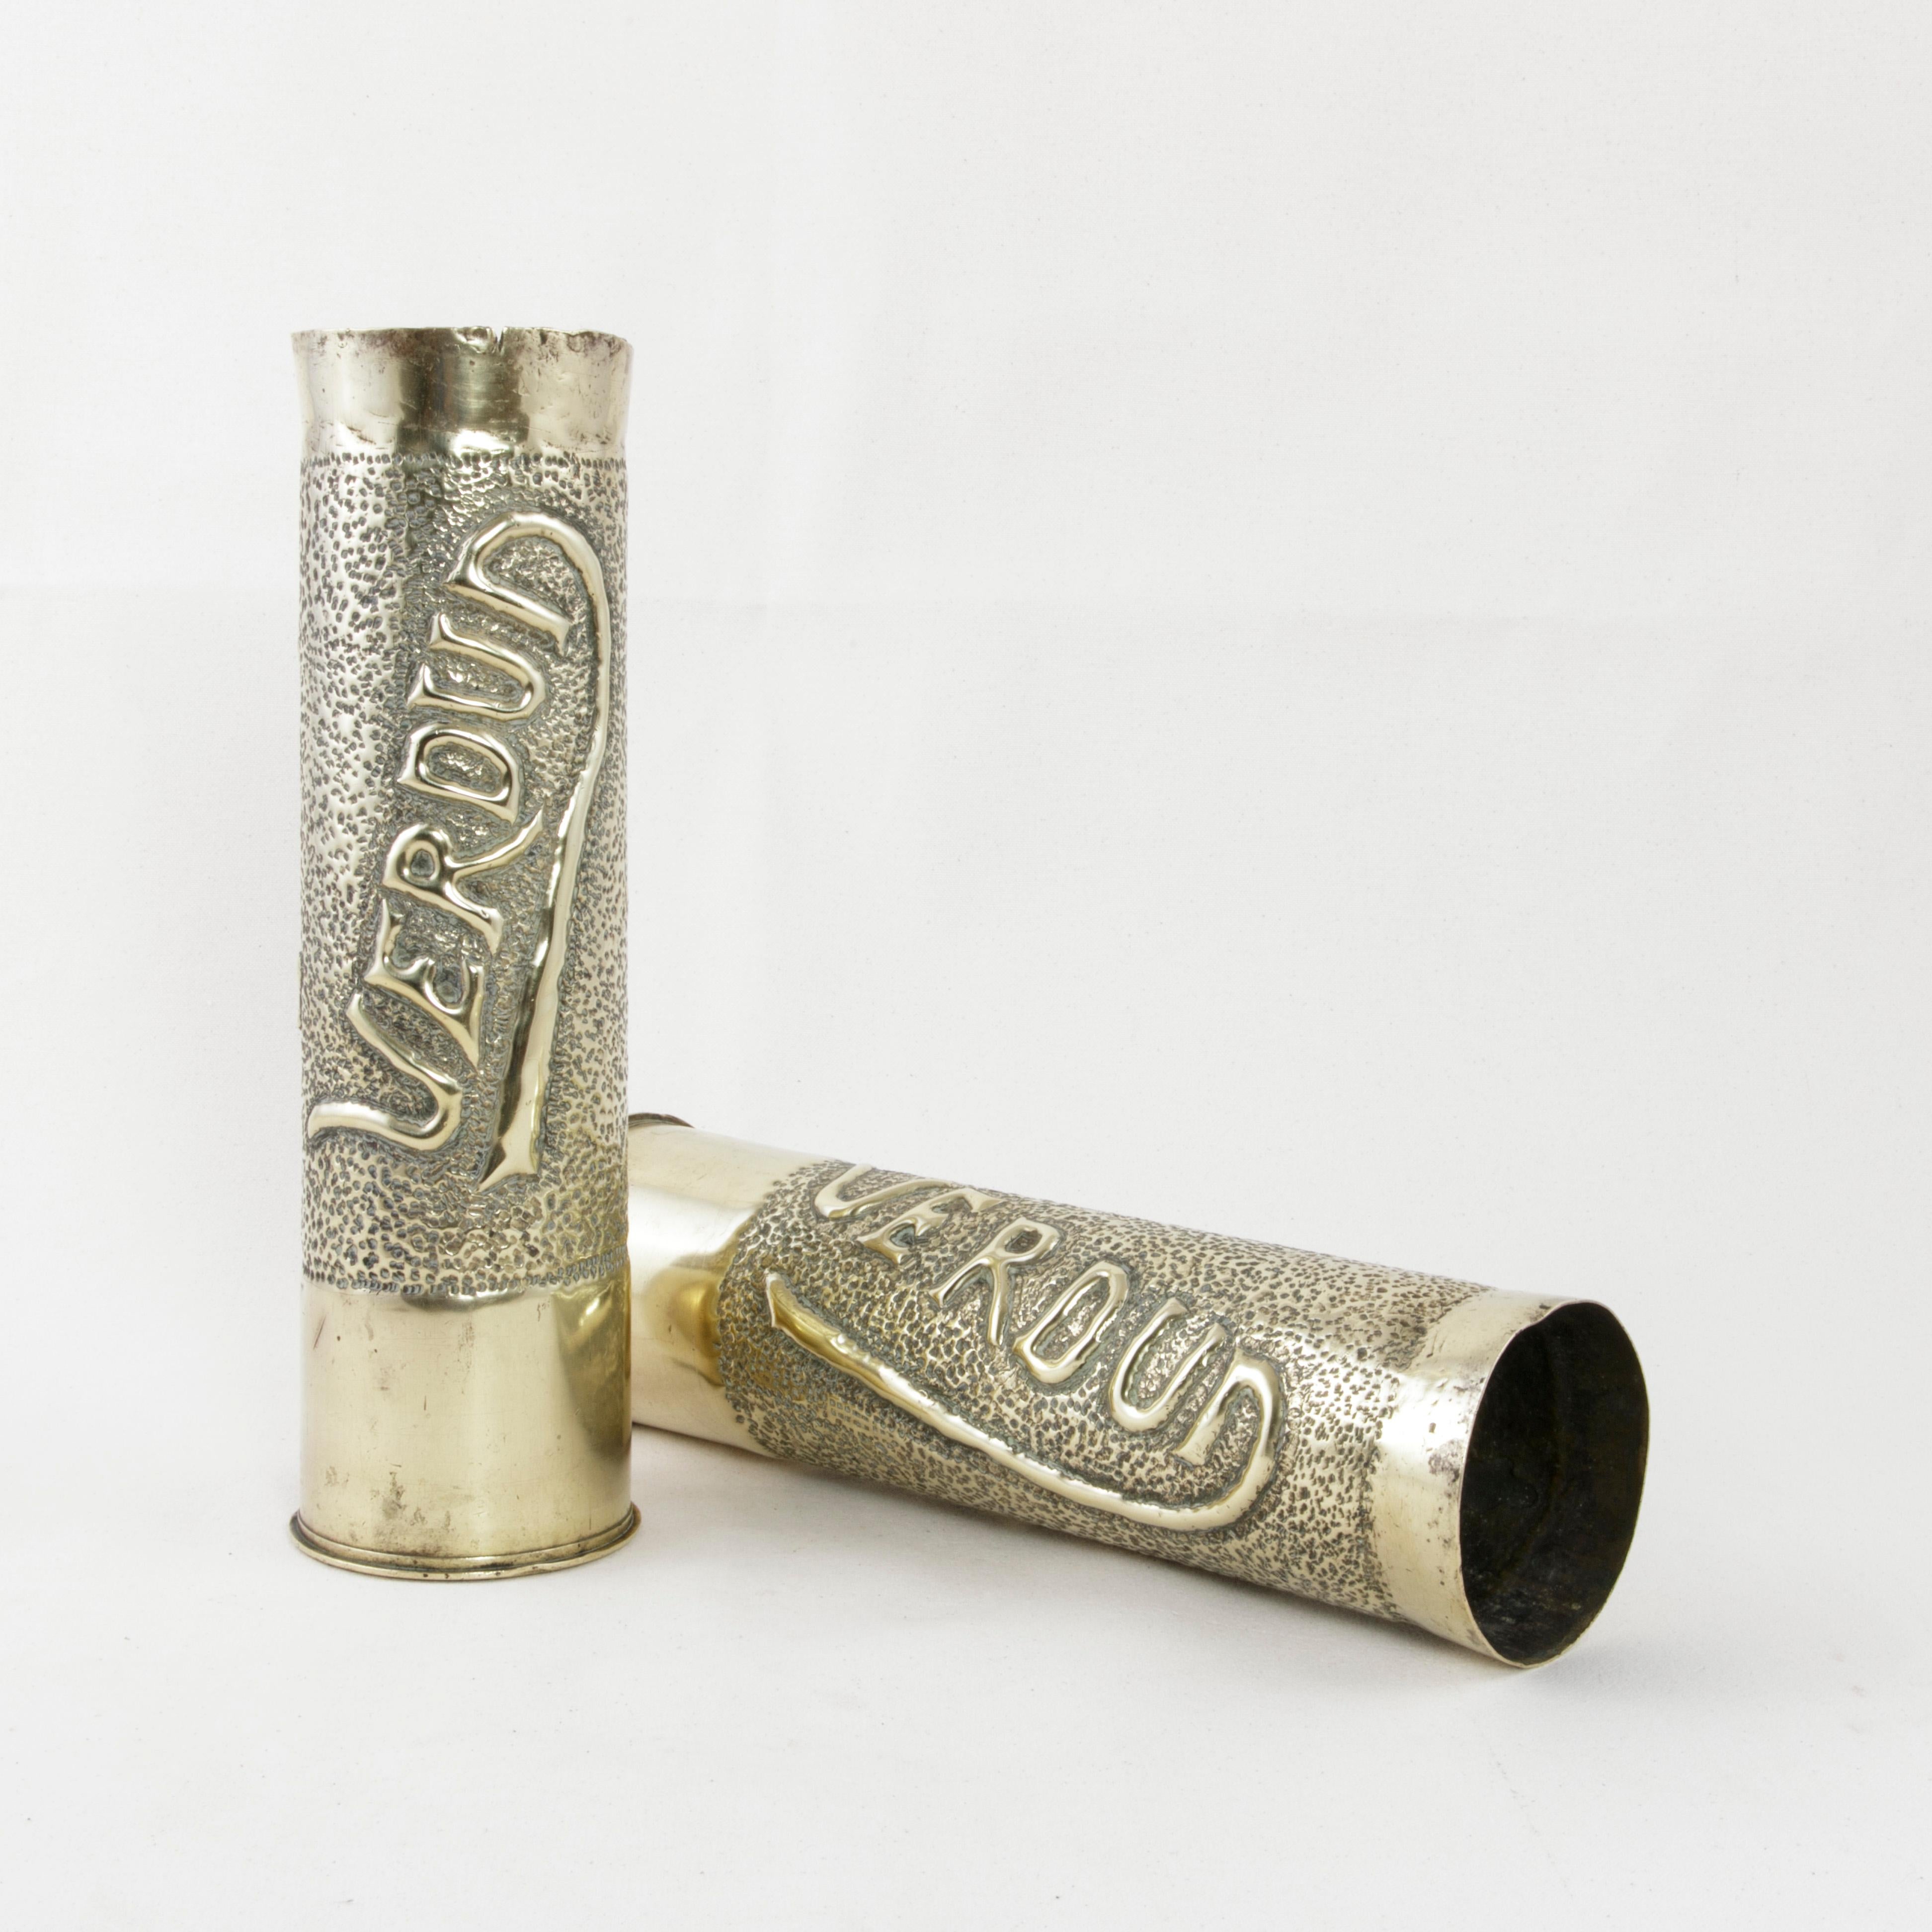 Made from spent artillery shells during the first World War, this pair of brass trench art vases features a repousse oak leaf on one side, and the name Verdun in Art Nouveau style lettering on the other. Verdun, fought in 1916, was one of the